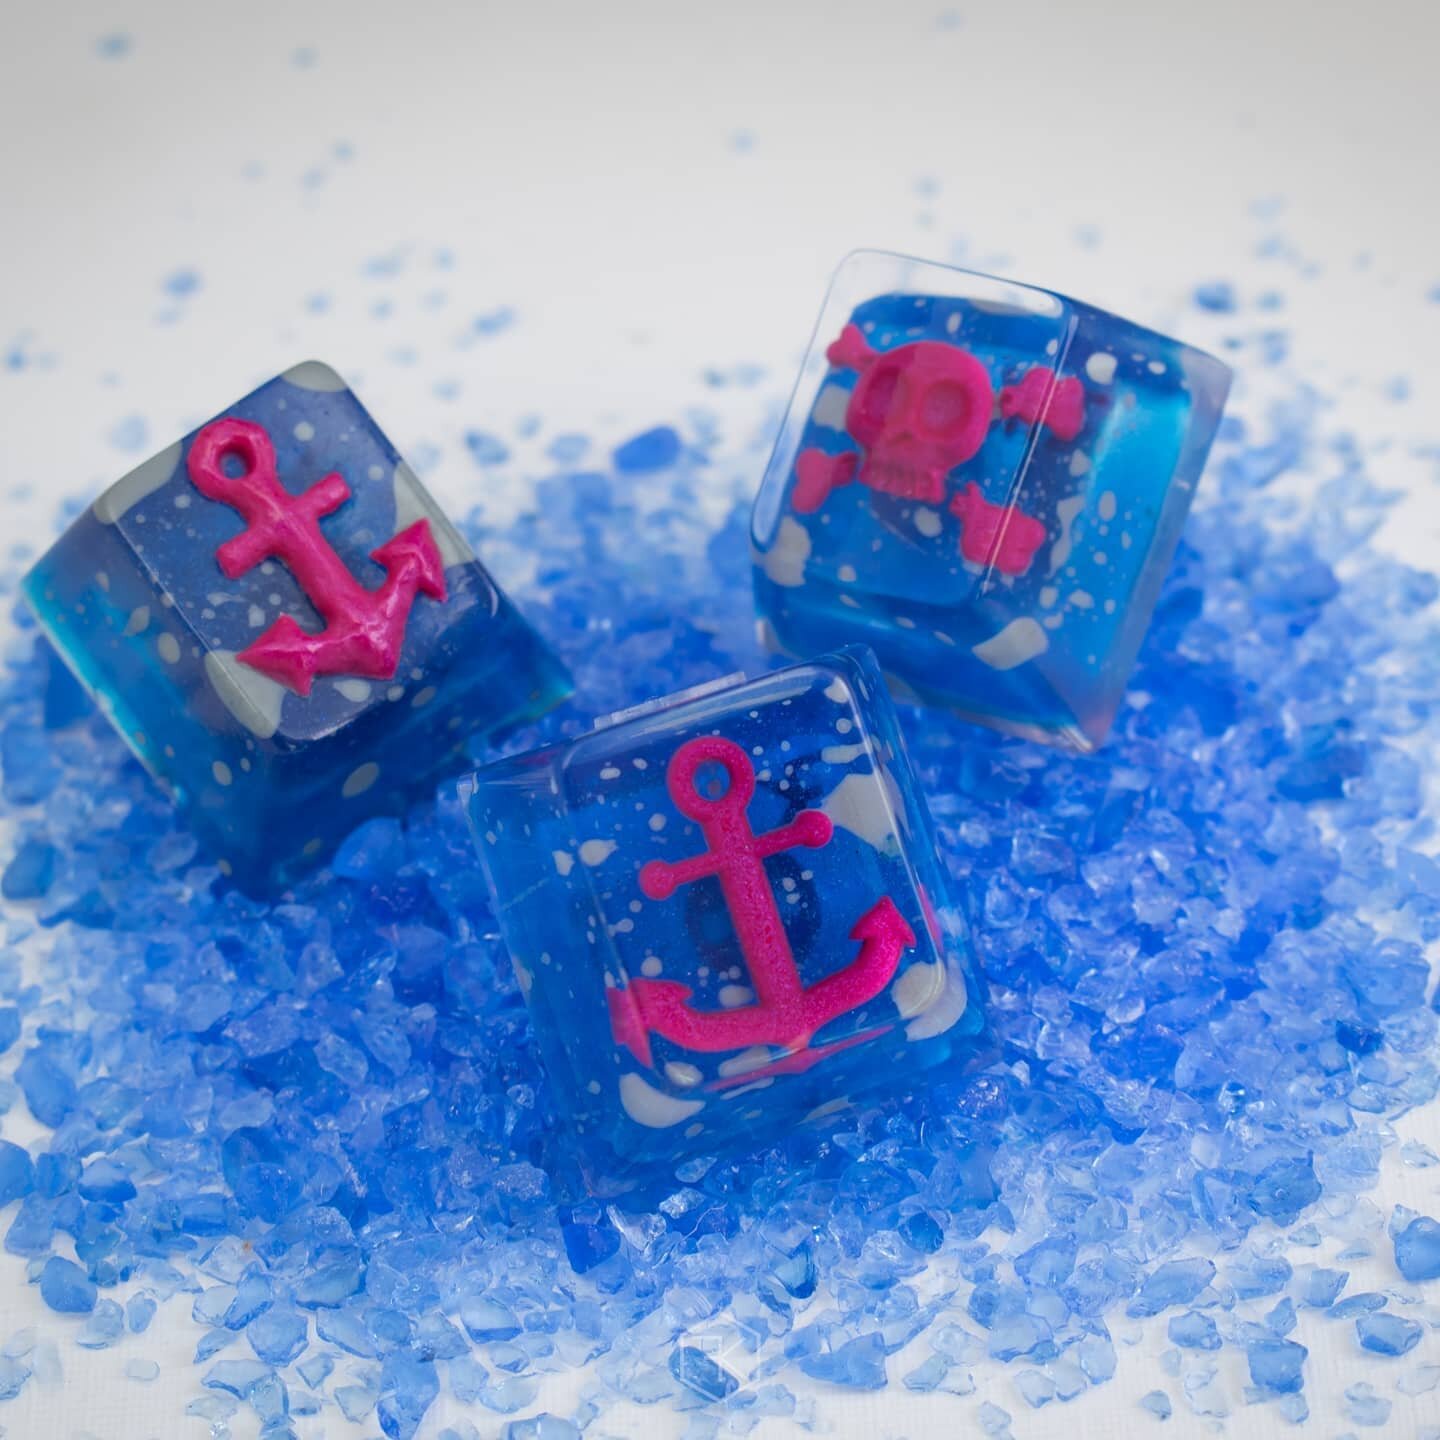 ＣＯＢＡＬＴ⁣
Sale now open for 24 hours! ⁣
⁣
Presenting my collaboration sale with @fatboycarney38 and his latest set, GMK Cobalt! In an ode to the inspiration for this set, these caps are filled with actual cobalt-blue glass shards (see last pic) that yo